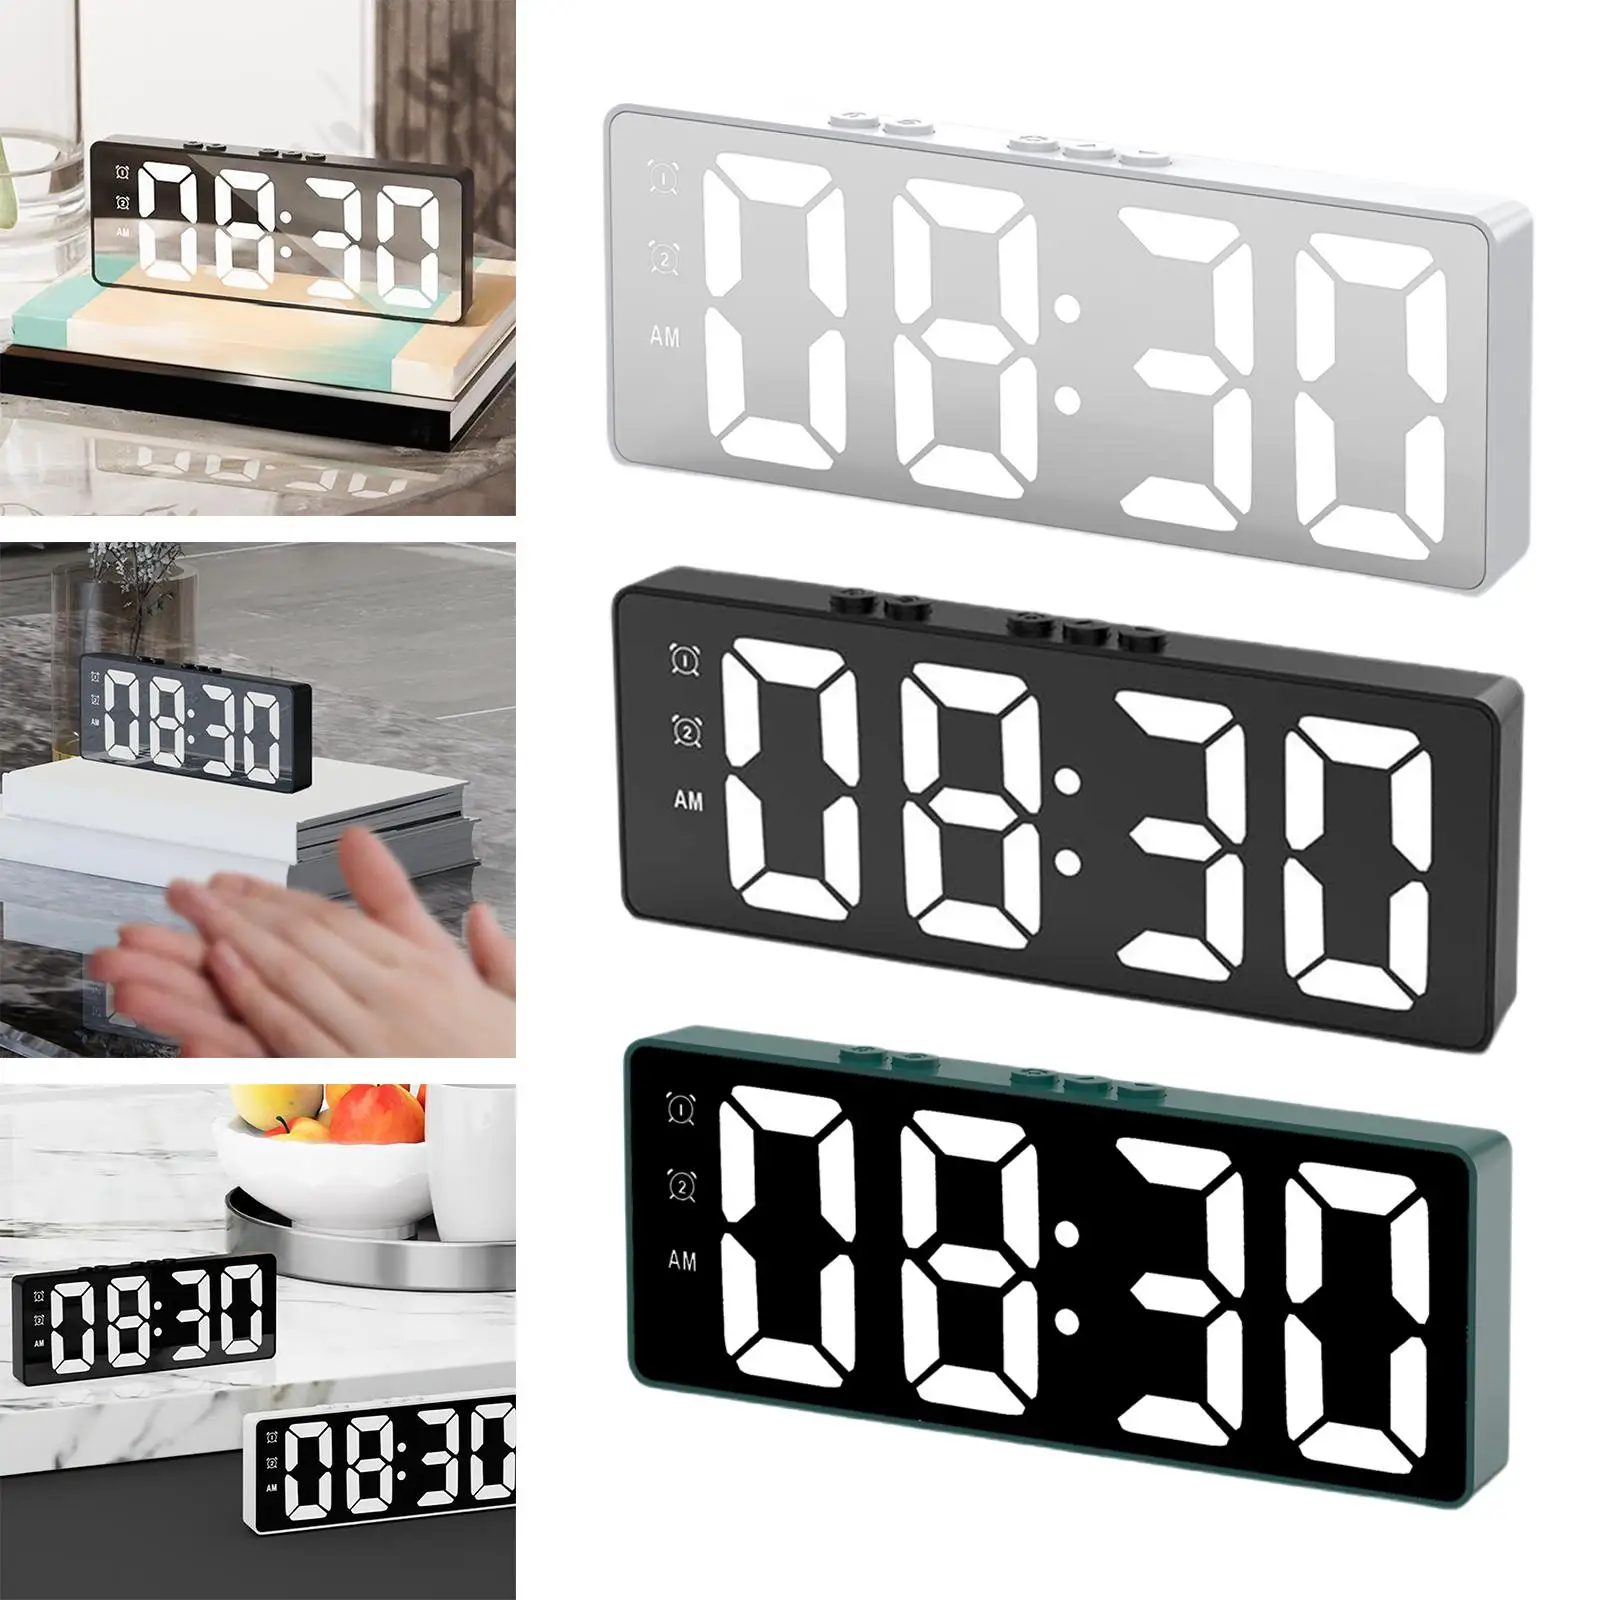 Electronic Clock Dual Alarm Clock Temperature Display for Office, Home, Gifts